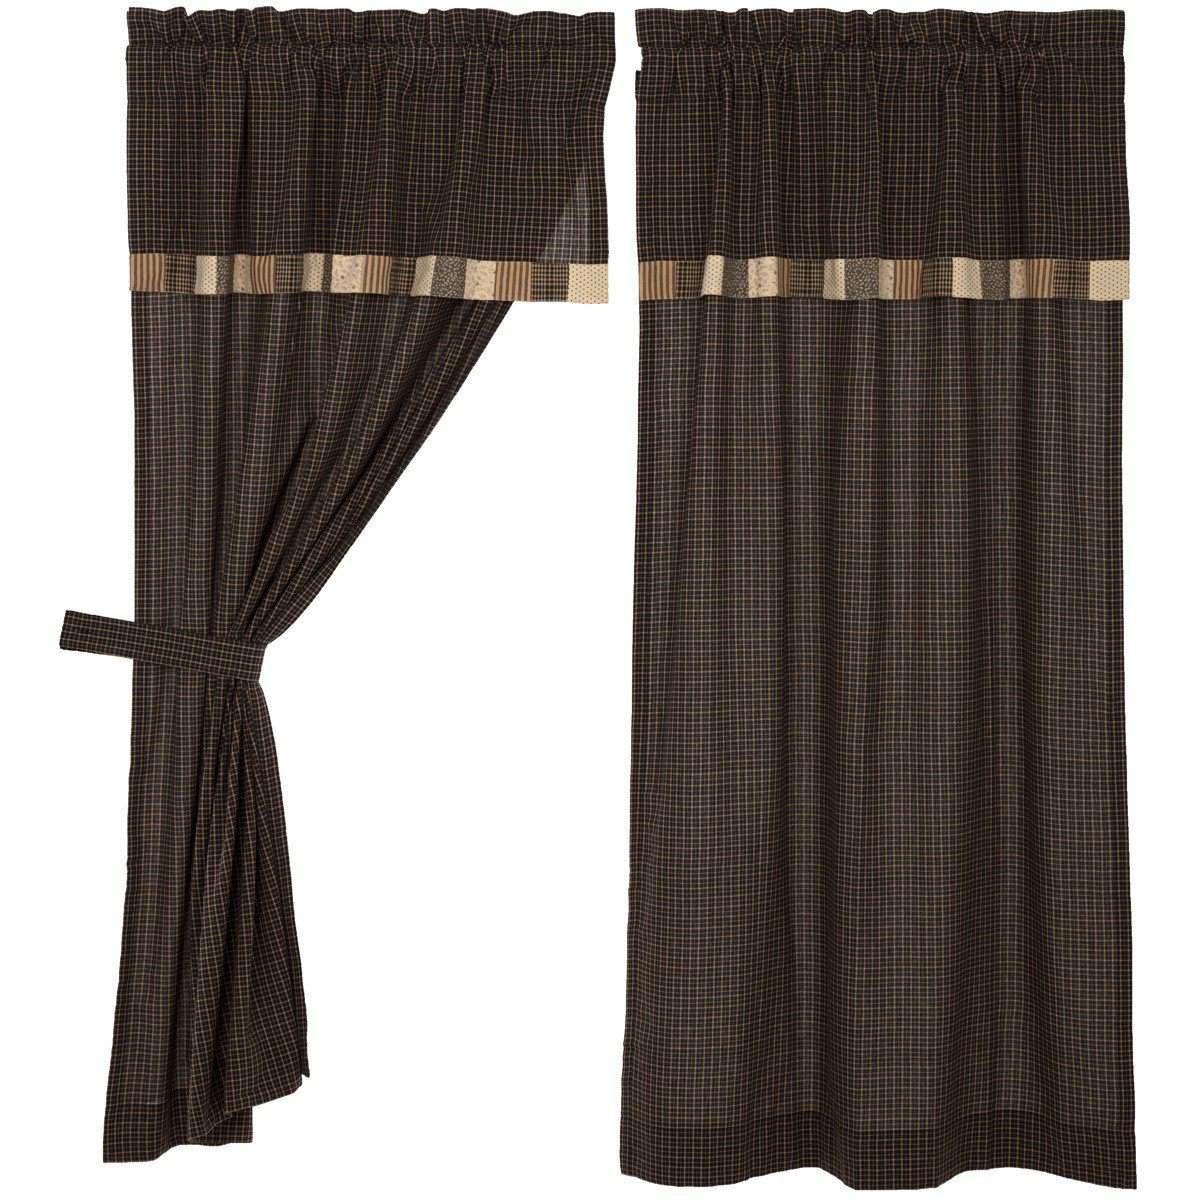 Kettle Grove Short Panel Curtain with Attached Valance Block Border Set of 2 36"x63" - The Fox Decor